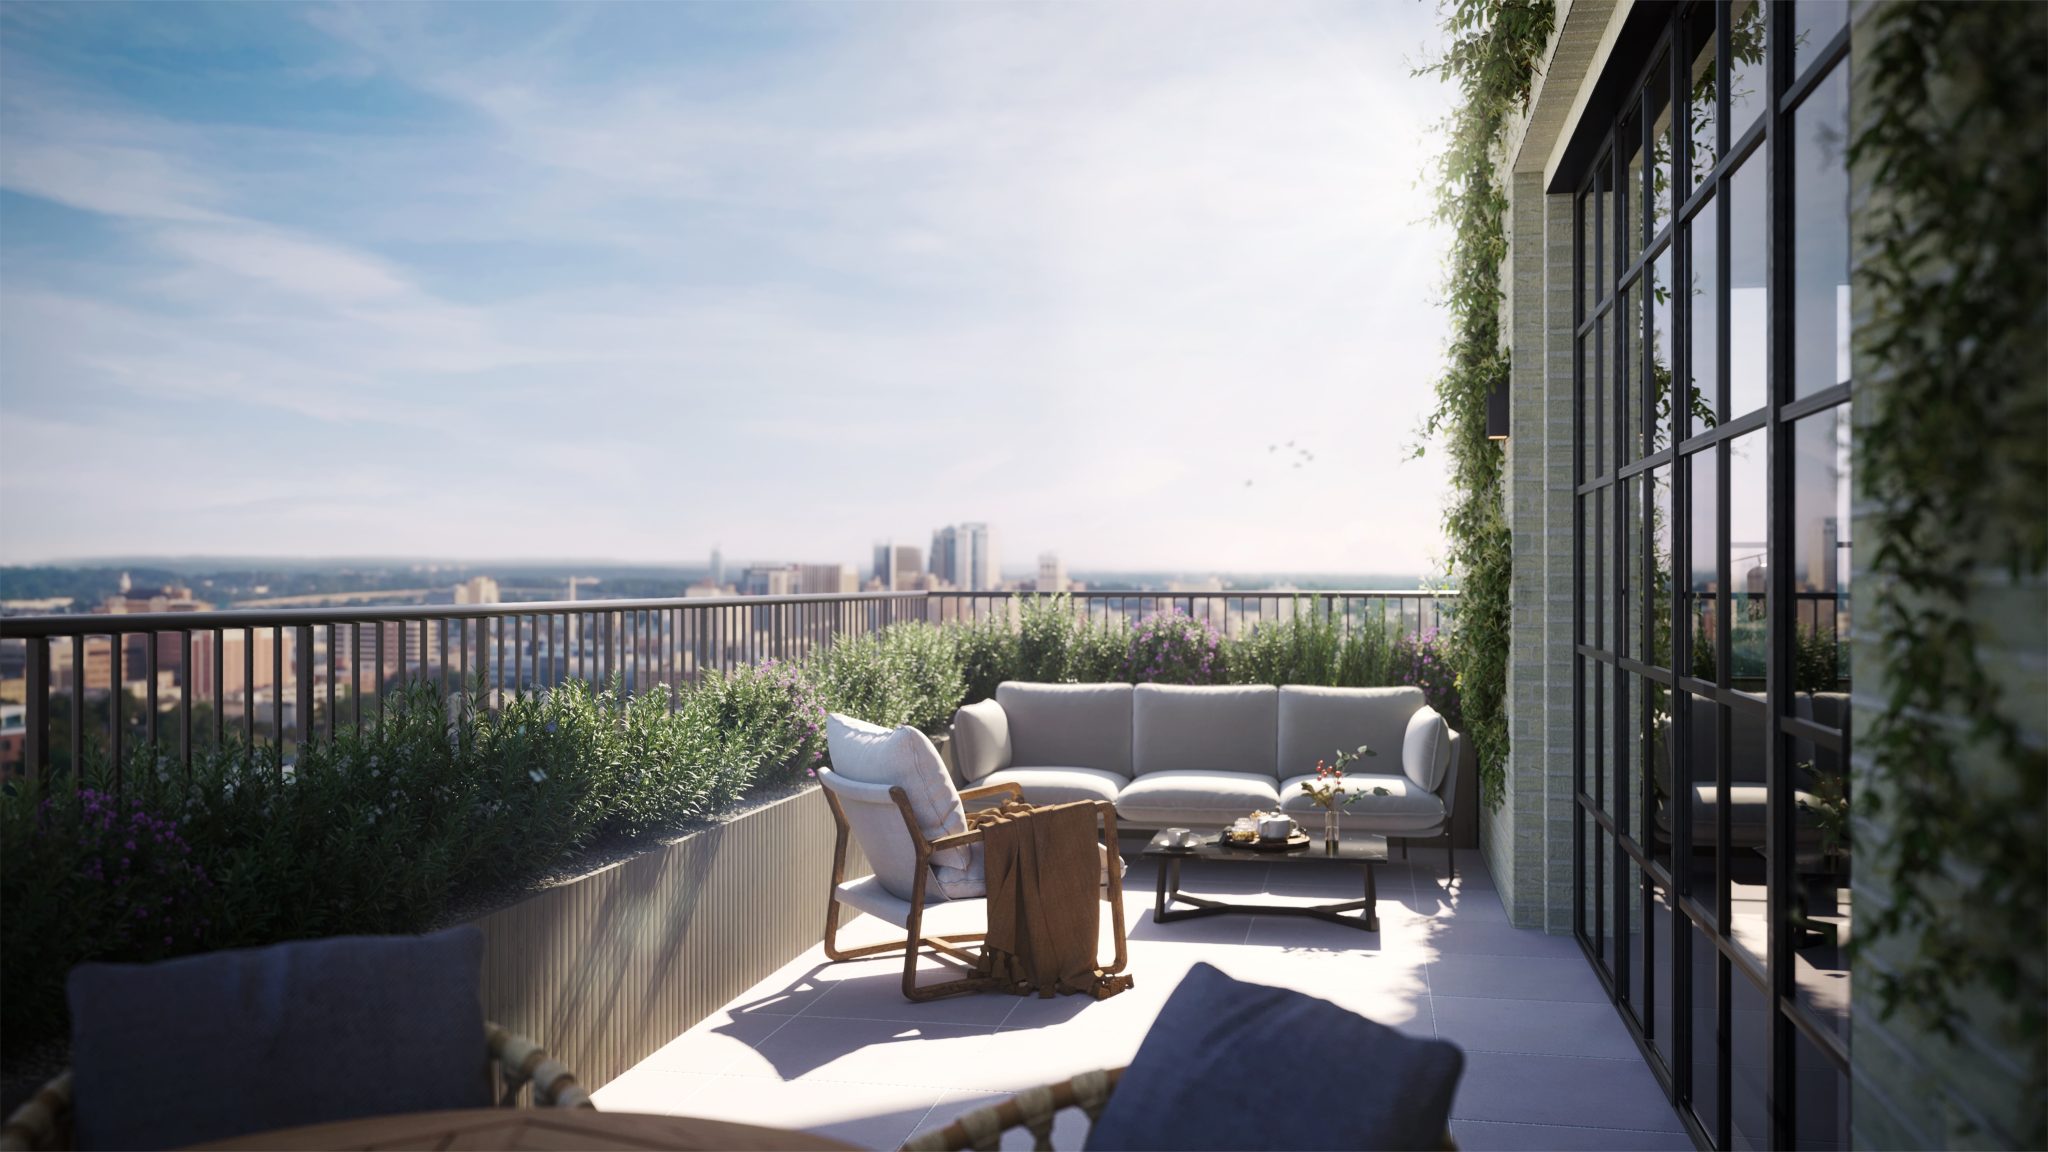 NEW: Luxury condos coming soon to the Highland-Redmont Park Districts